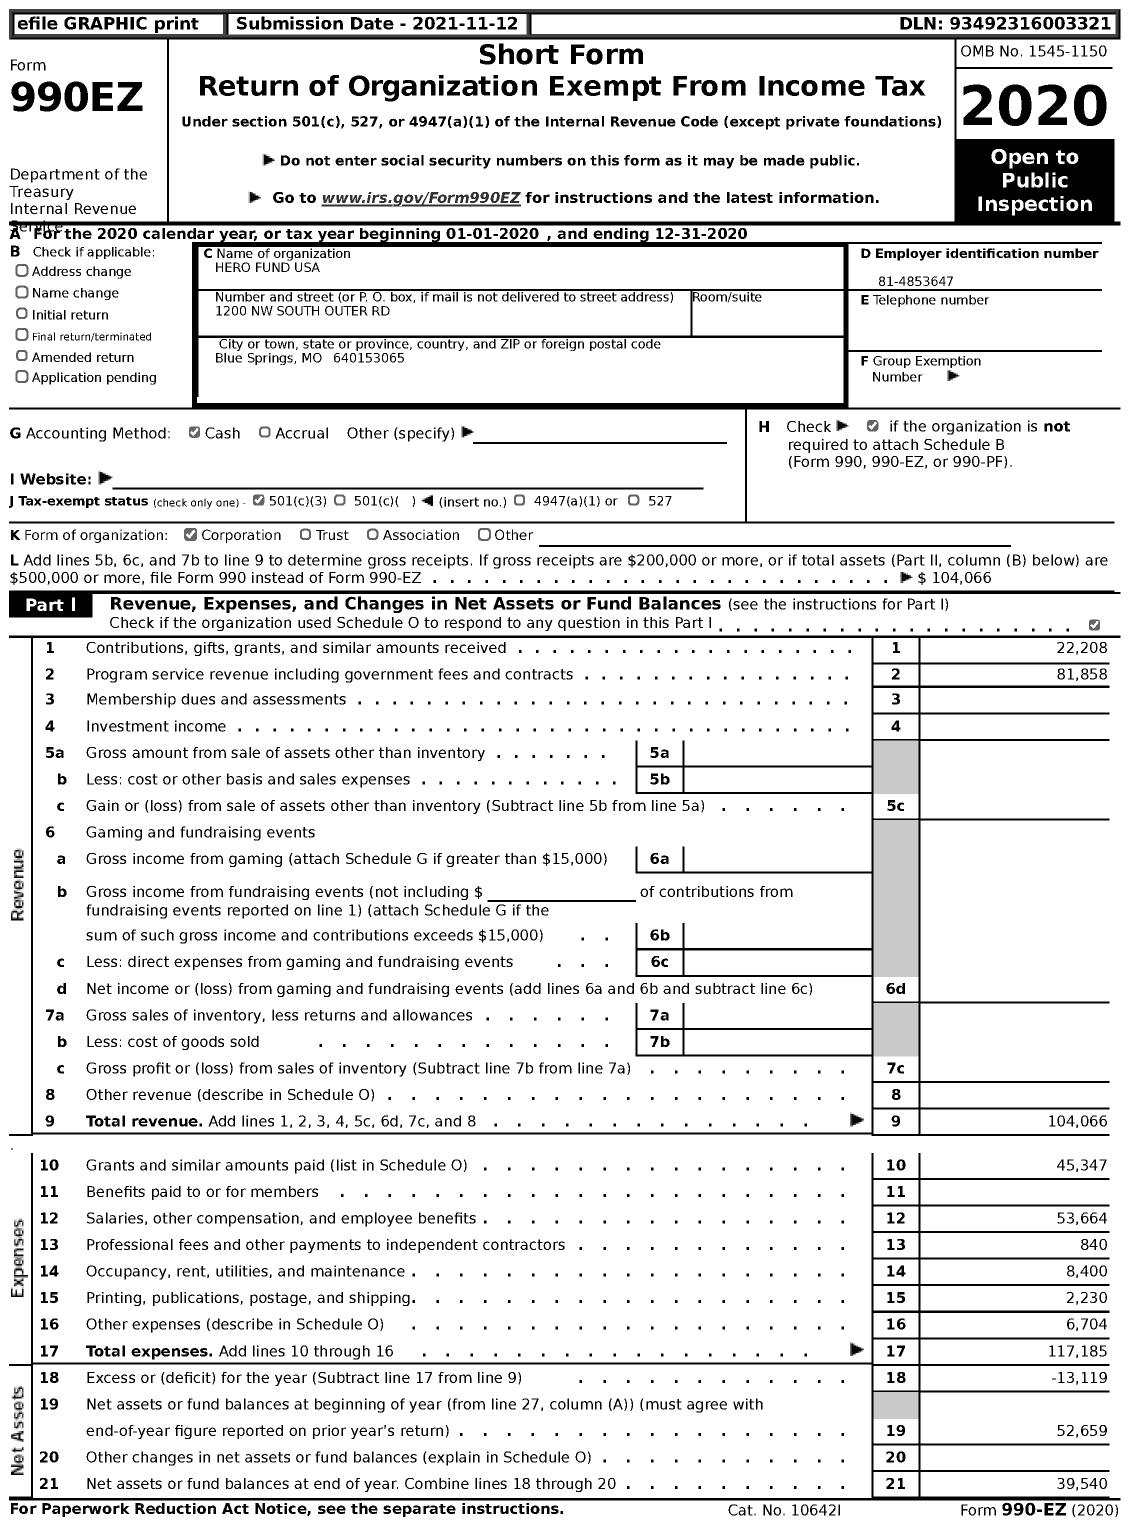 Image of first page of 2020 Form 990EZ for Hero Fund USA